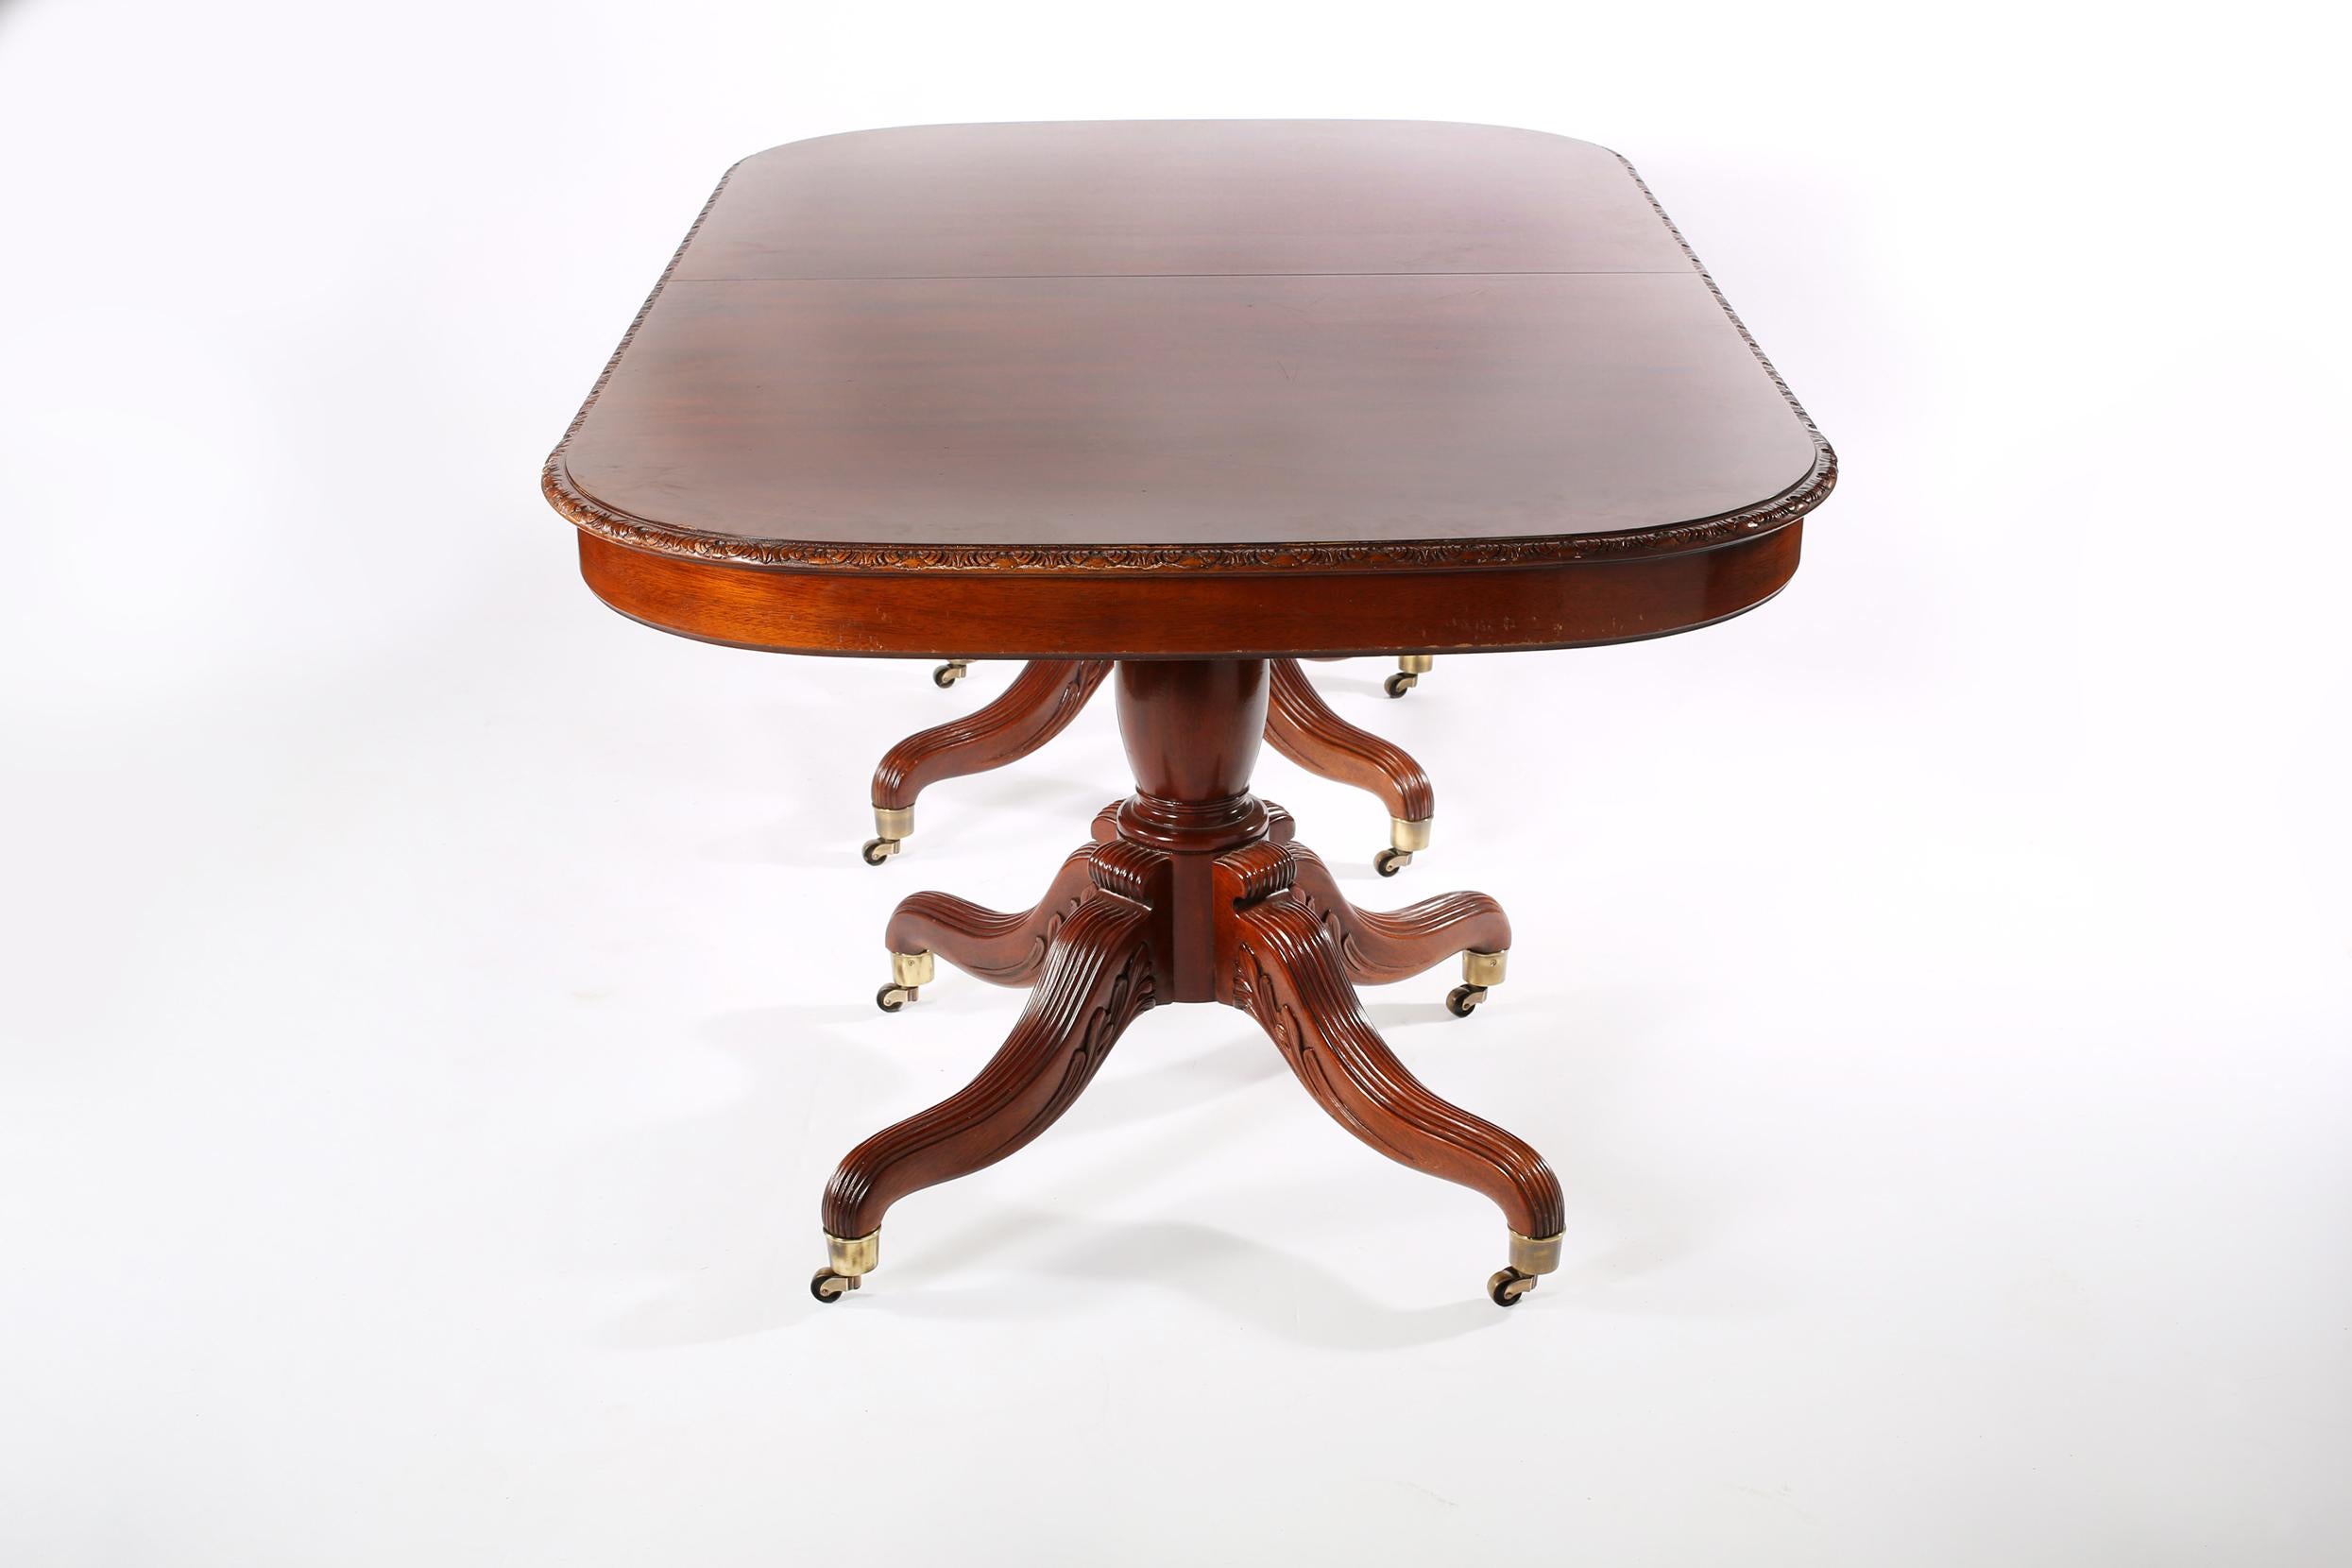 Finest craftsmanship of mid-20th century North American mahogany wood dining room table with three extension leaves. The table is in great vintage condition with minor wear consistent with age / use. Maker's mark undersigned. The table is about 78